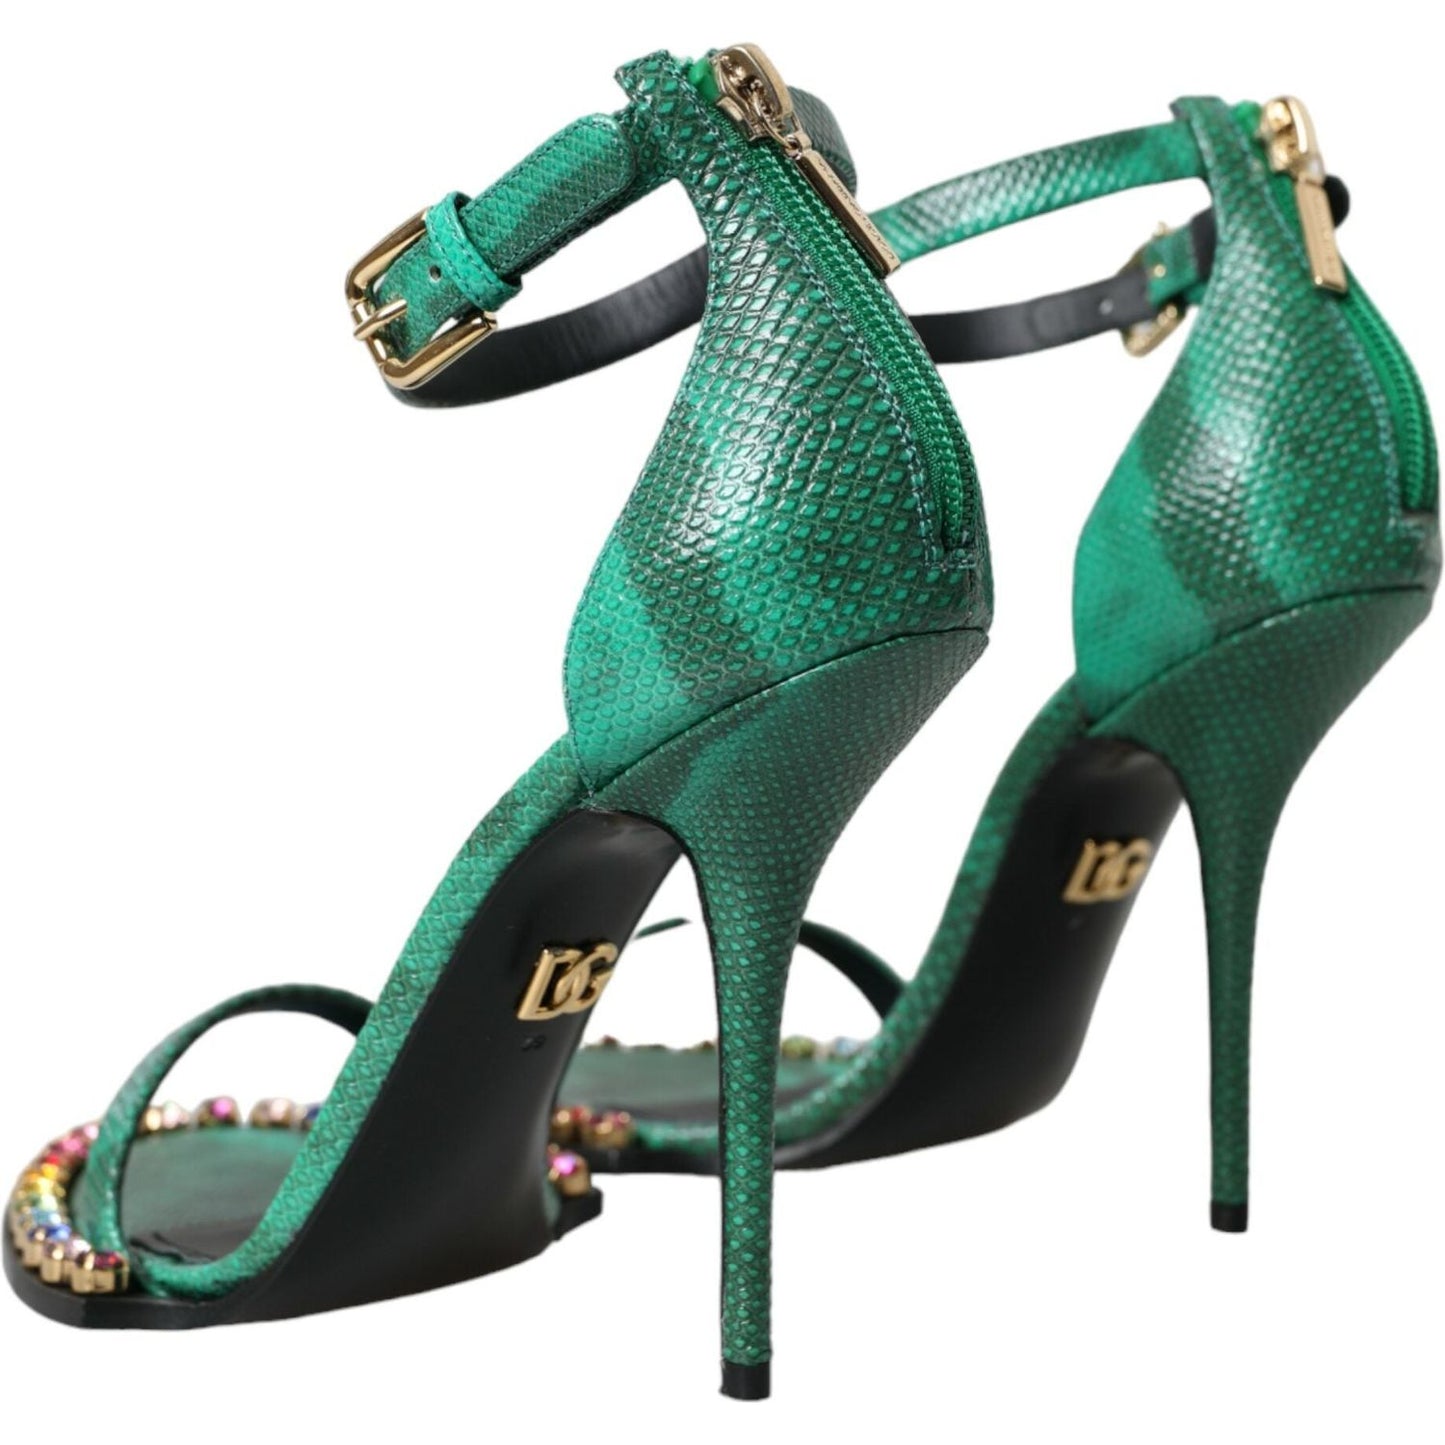 Dolce & Gabbana Green Exotic Leather Crystal Sandals Shoes green-exotic-leather-crystal-sandals-shoes